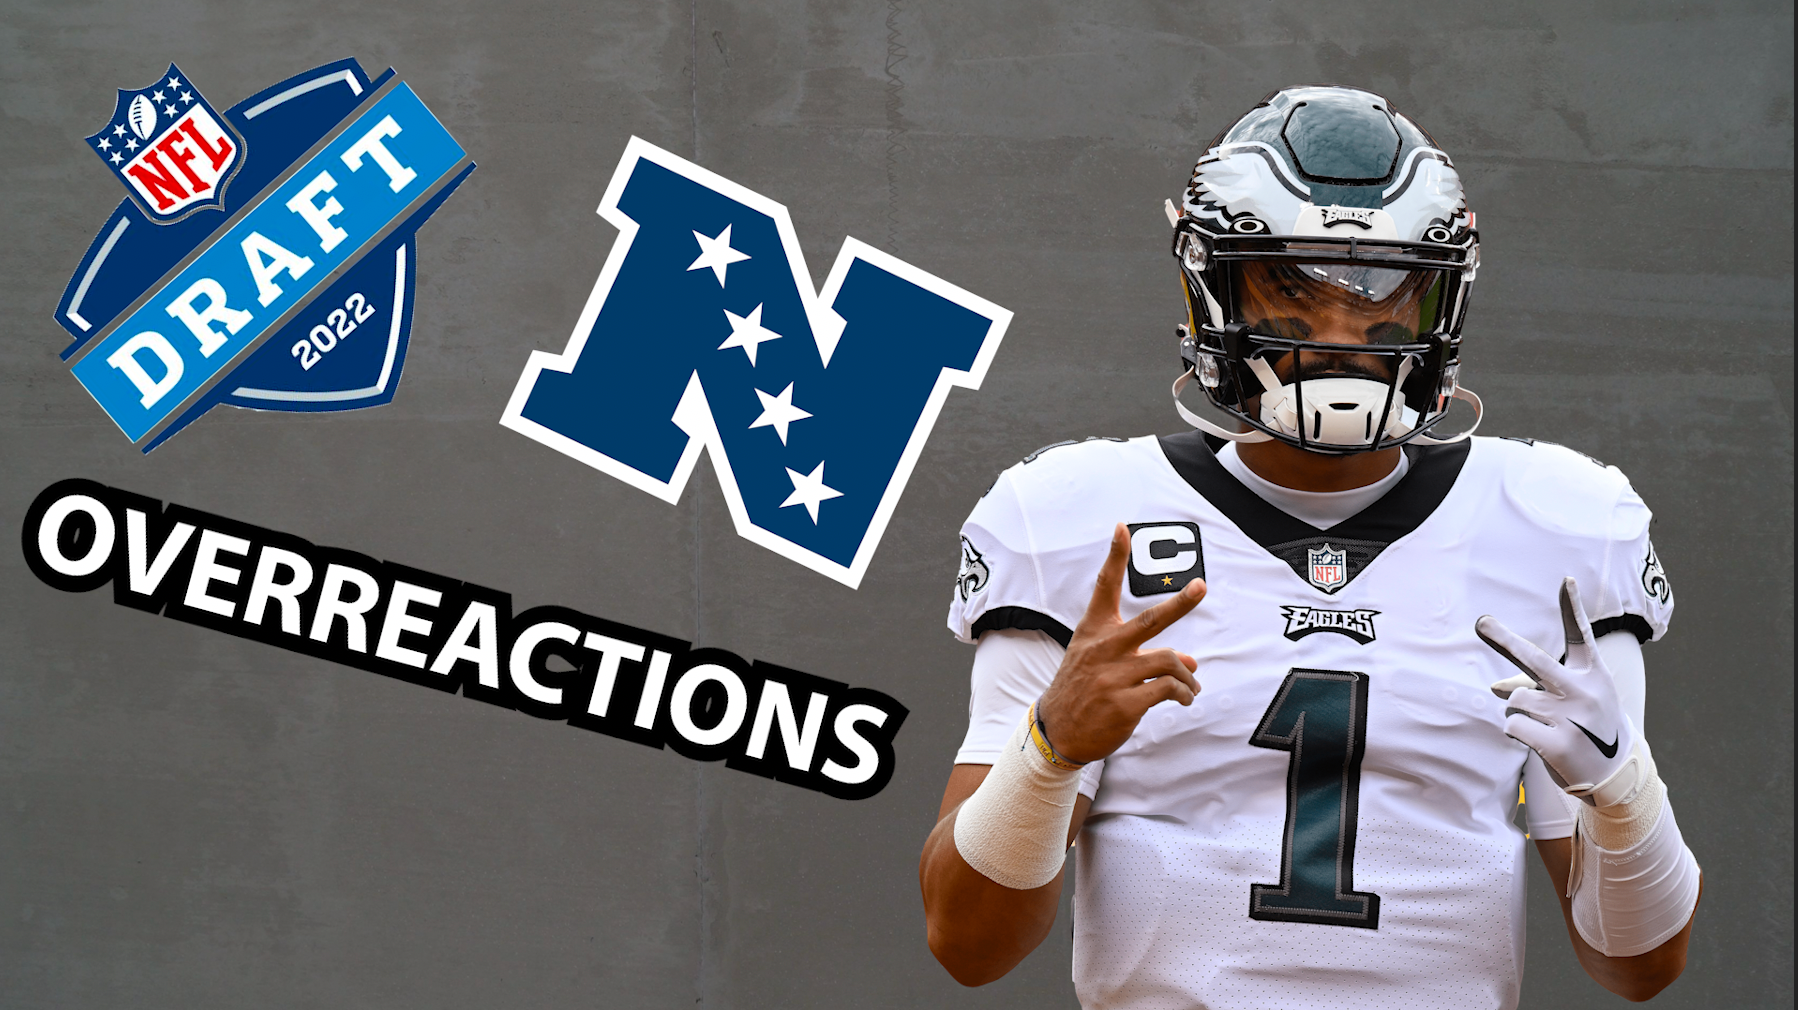 Post Draft NFC overreactions: Are Eagles dark horse contenders after stellar draft? thumbnail